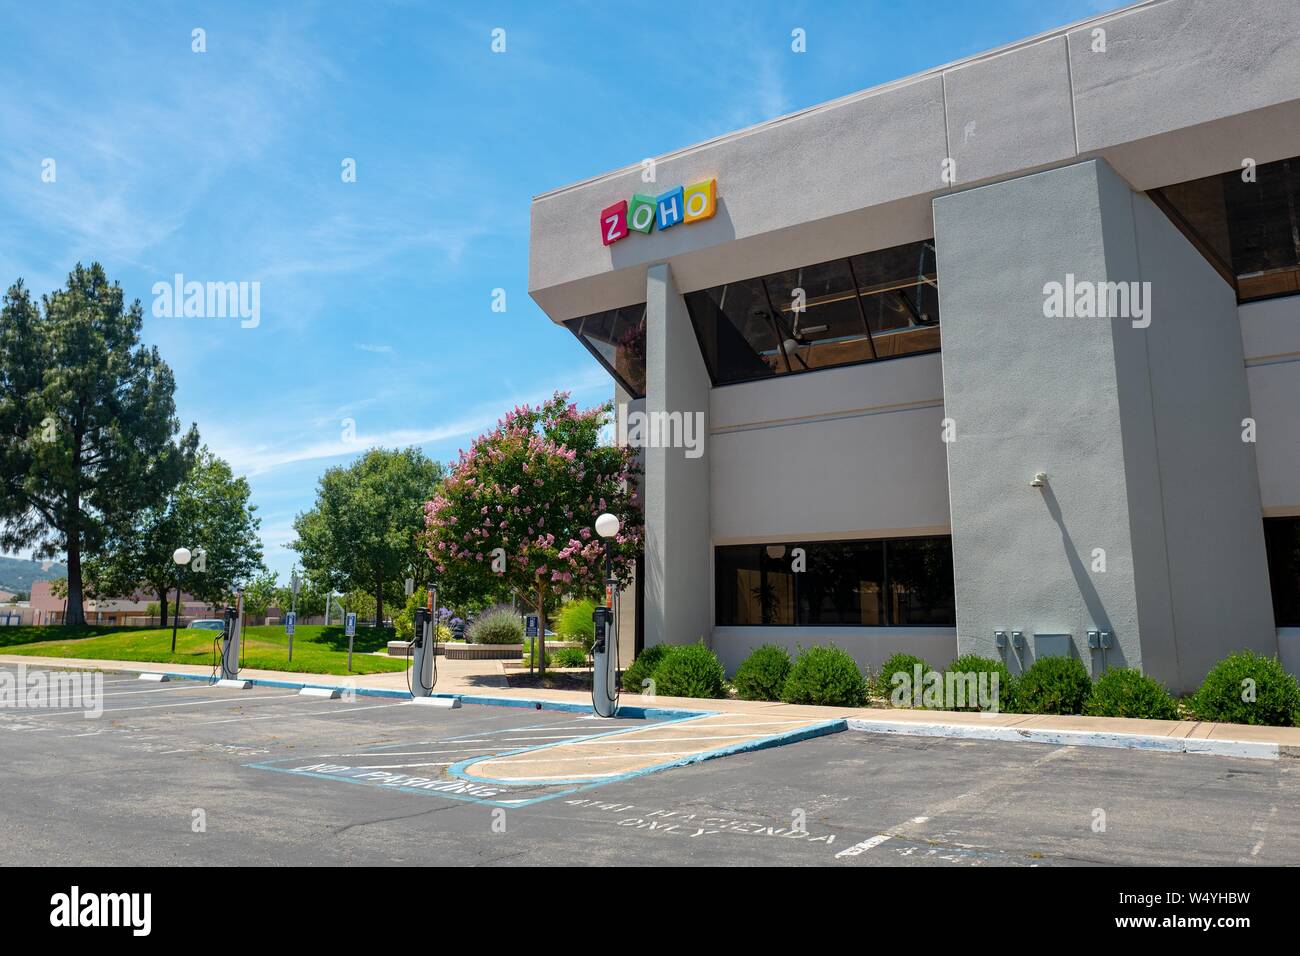 Facade with sign and logo at entrance to office of Customer Relationship Management (CRM) software company Zoho in Pleasanton, California, July 2, 2019. () Stock Photo